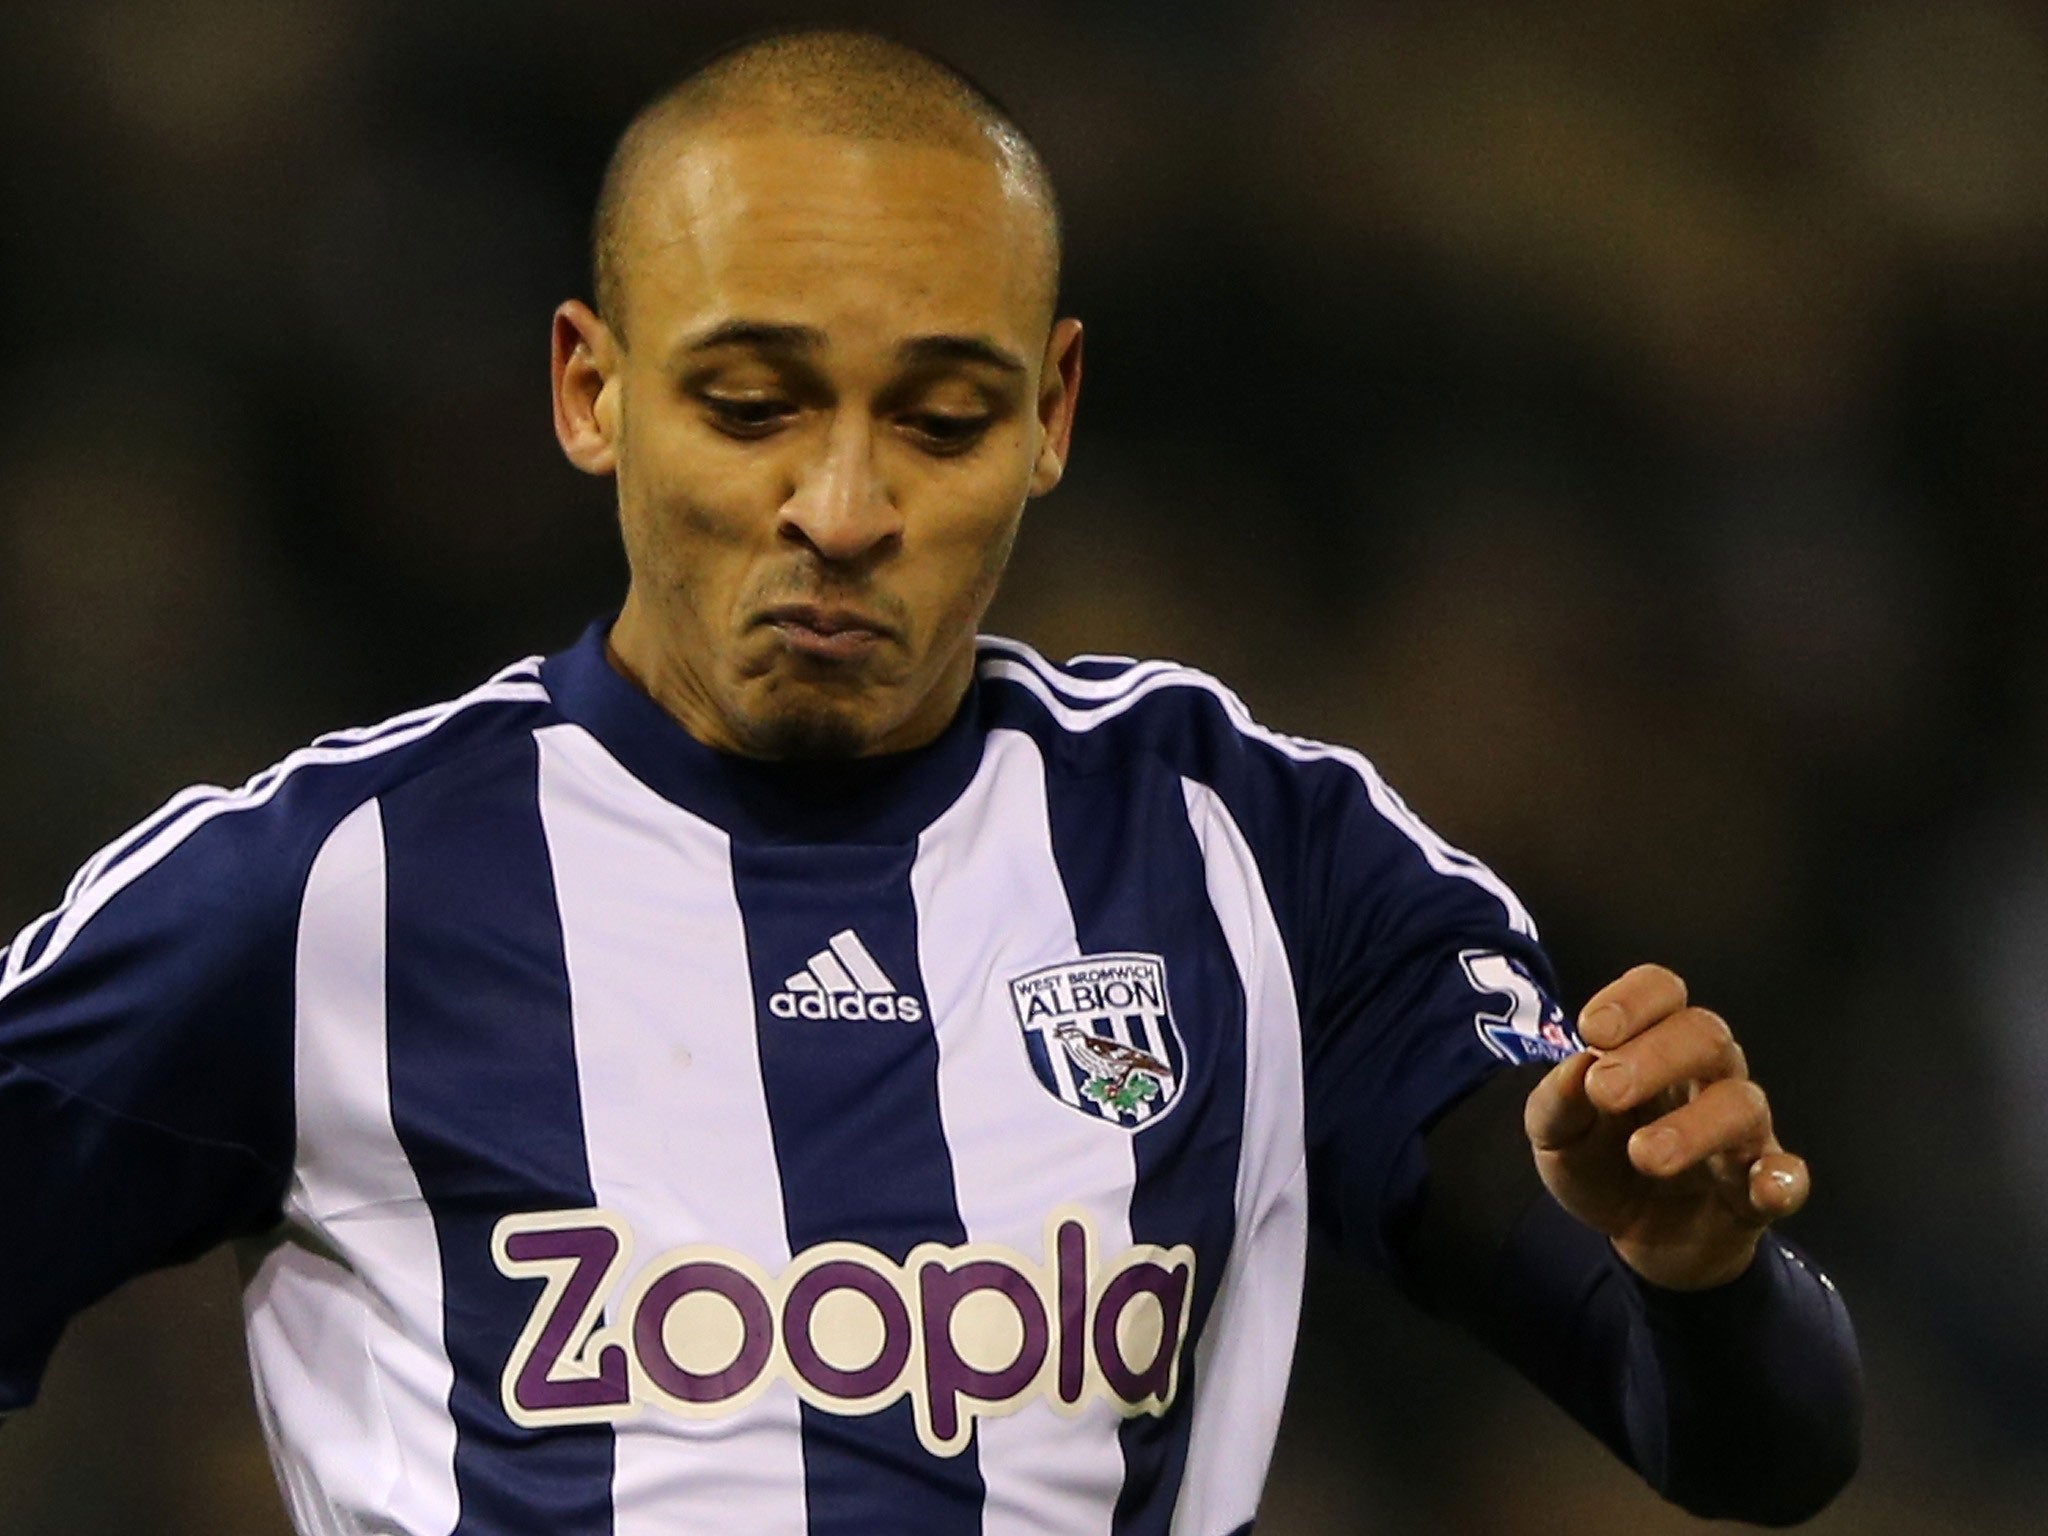 Peter Odemwingie failed to secure a switch to QPR in January despite turning up at Loftus Road on transfer deadline day